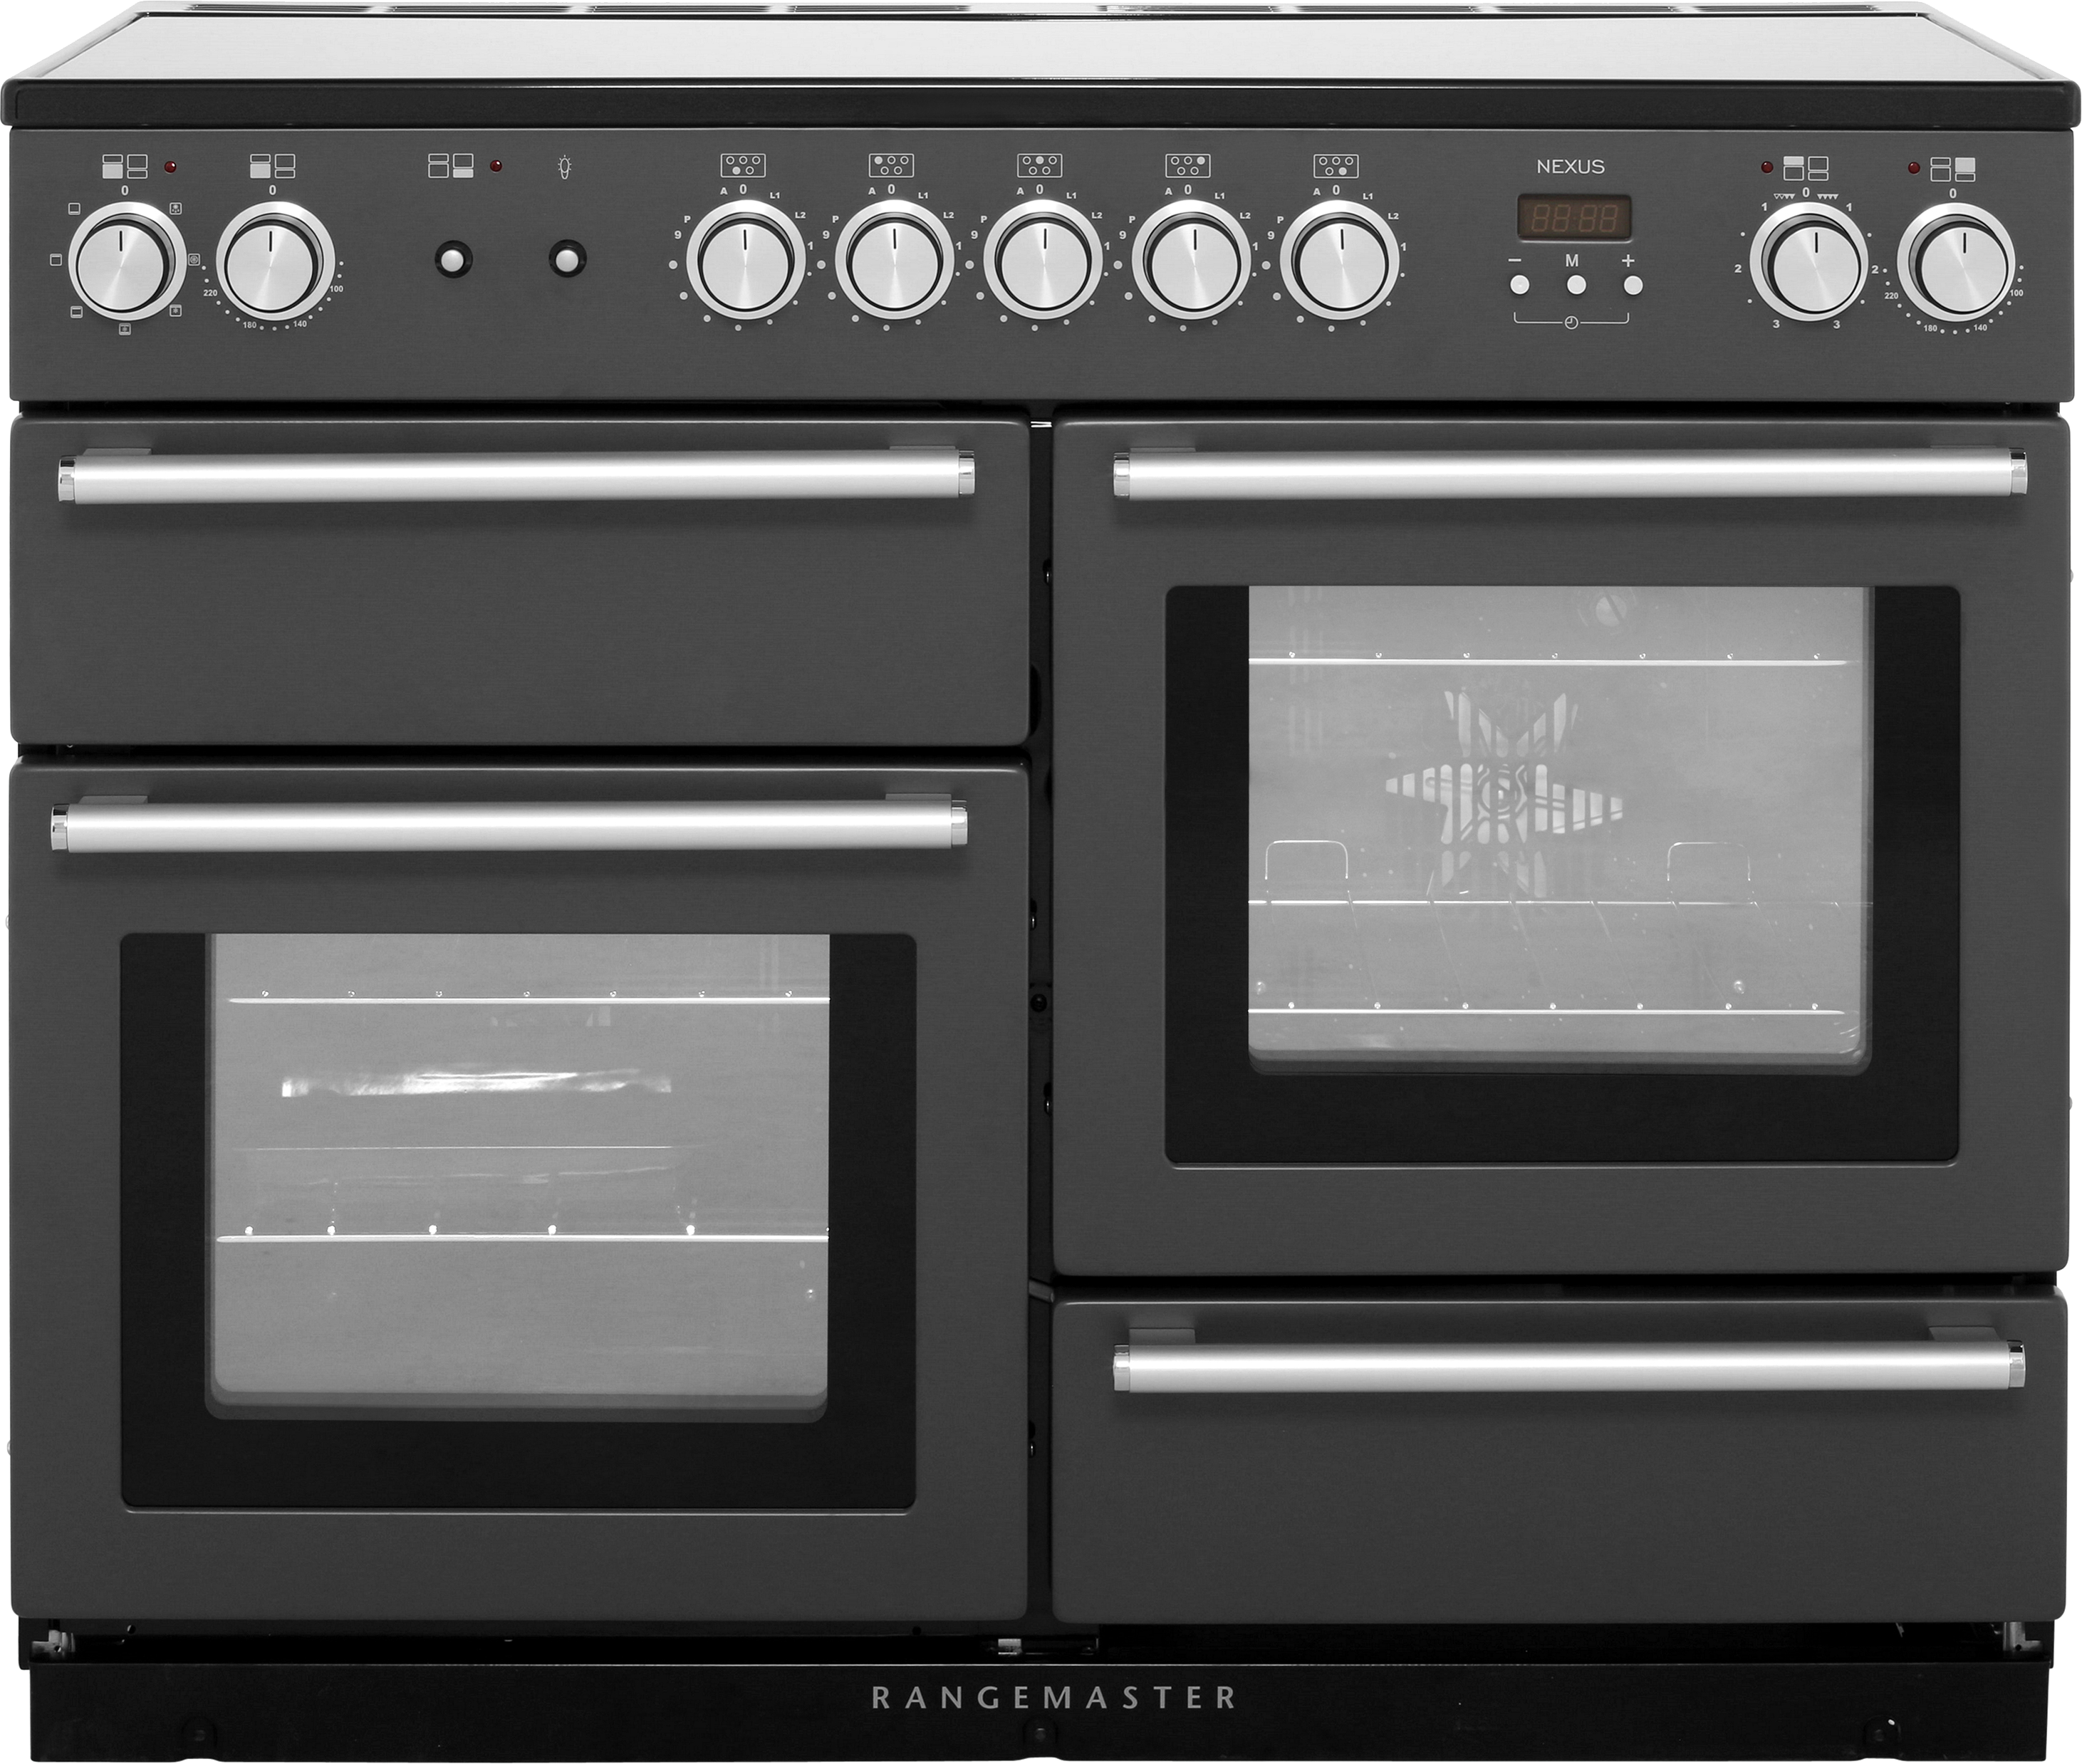 Rangemaster Nexus NEX110EISL/C 110cm Electric Range Cooker with Induction Hob - Slate - A/A Rated, Graphite